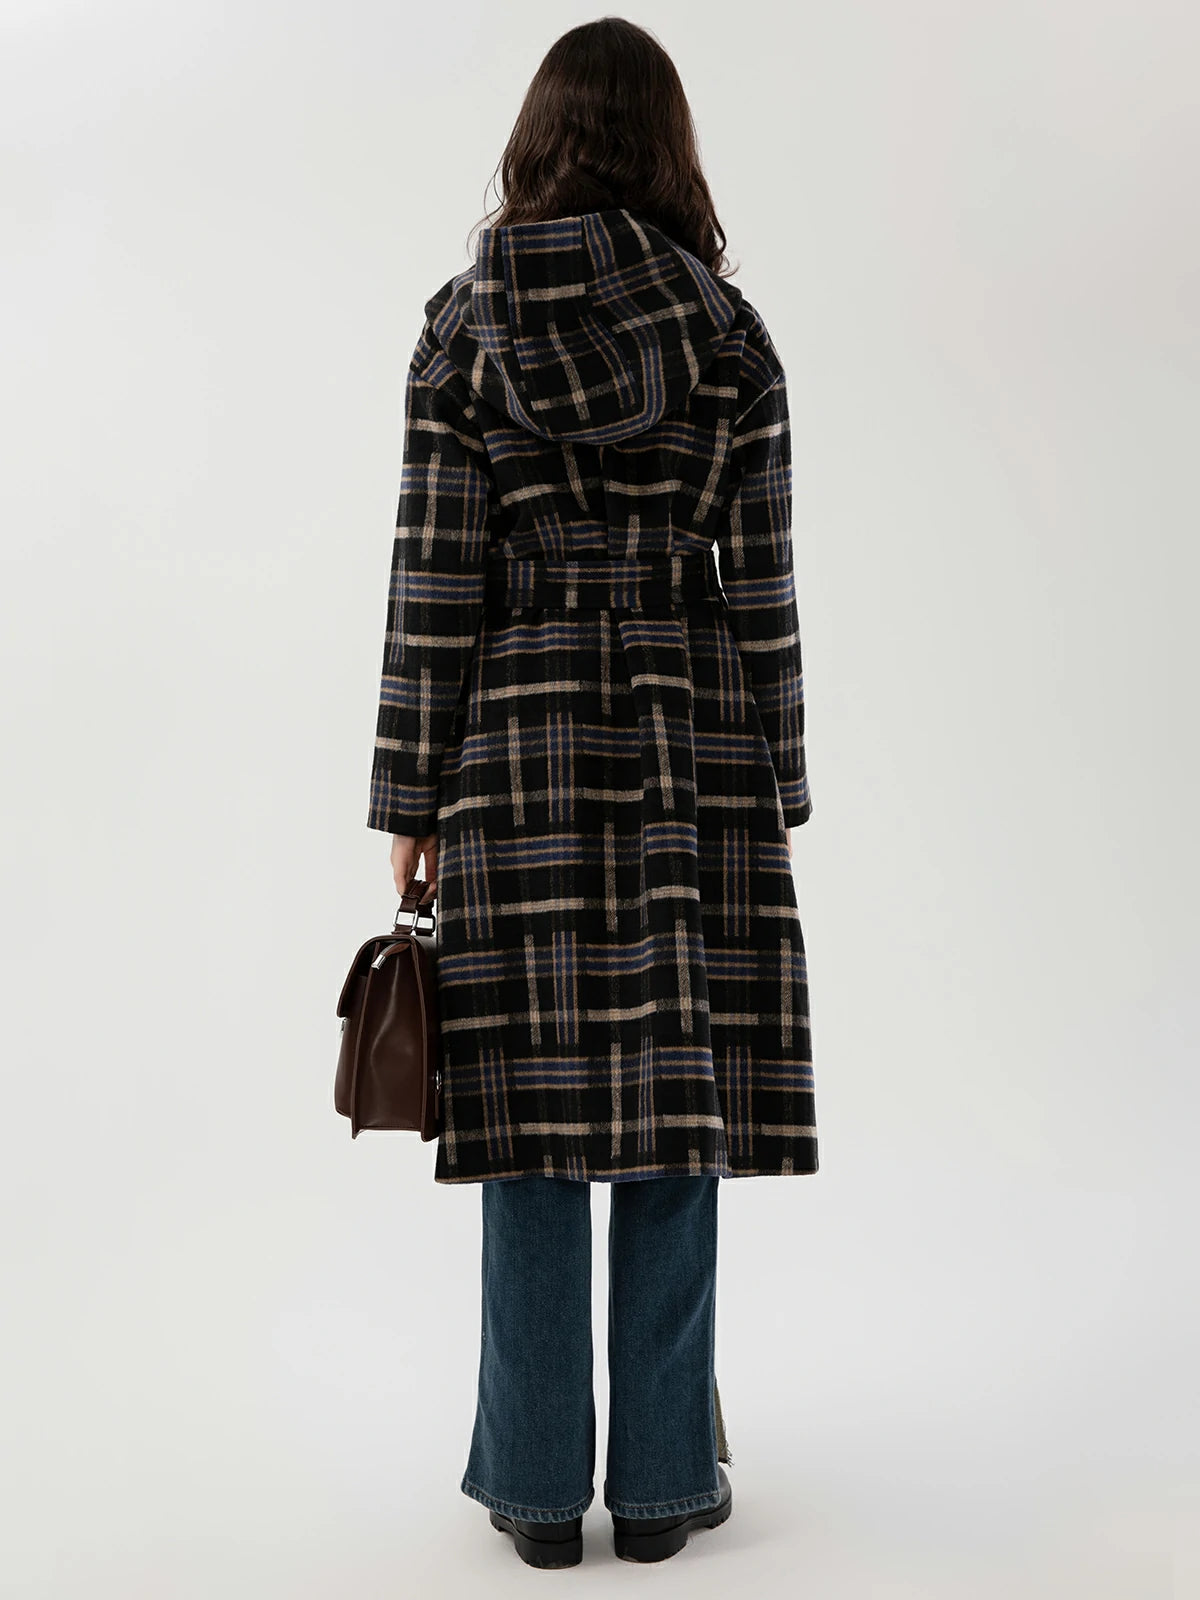 Retro-inspired blue-black plaid coat with a hood for a cozy and chic ensemble